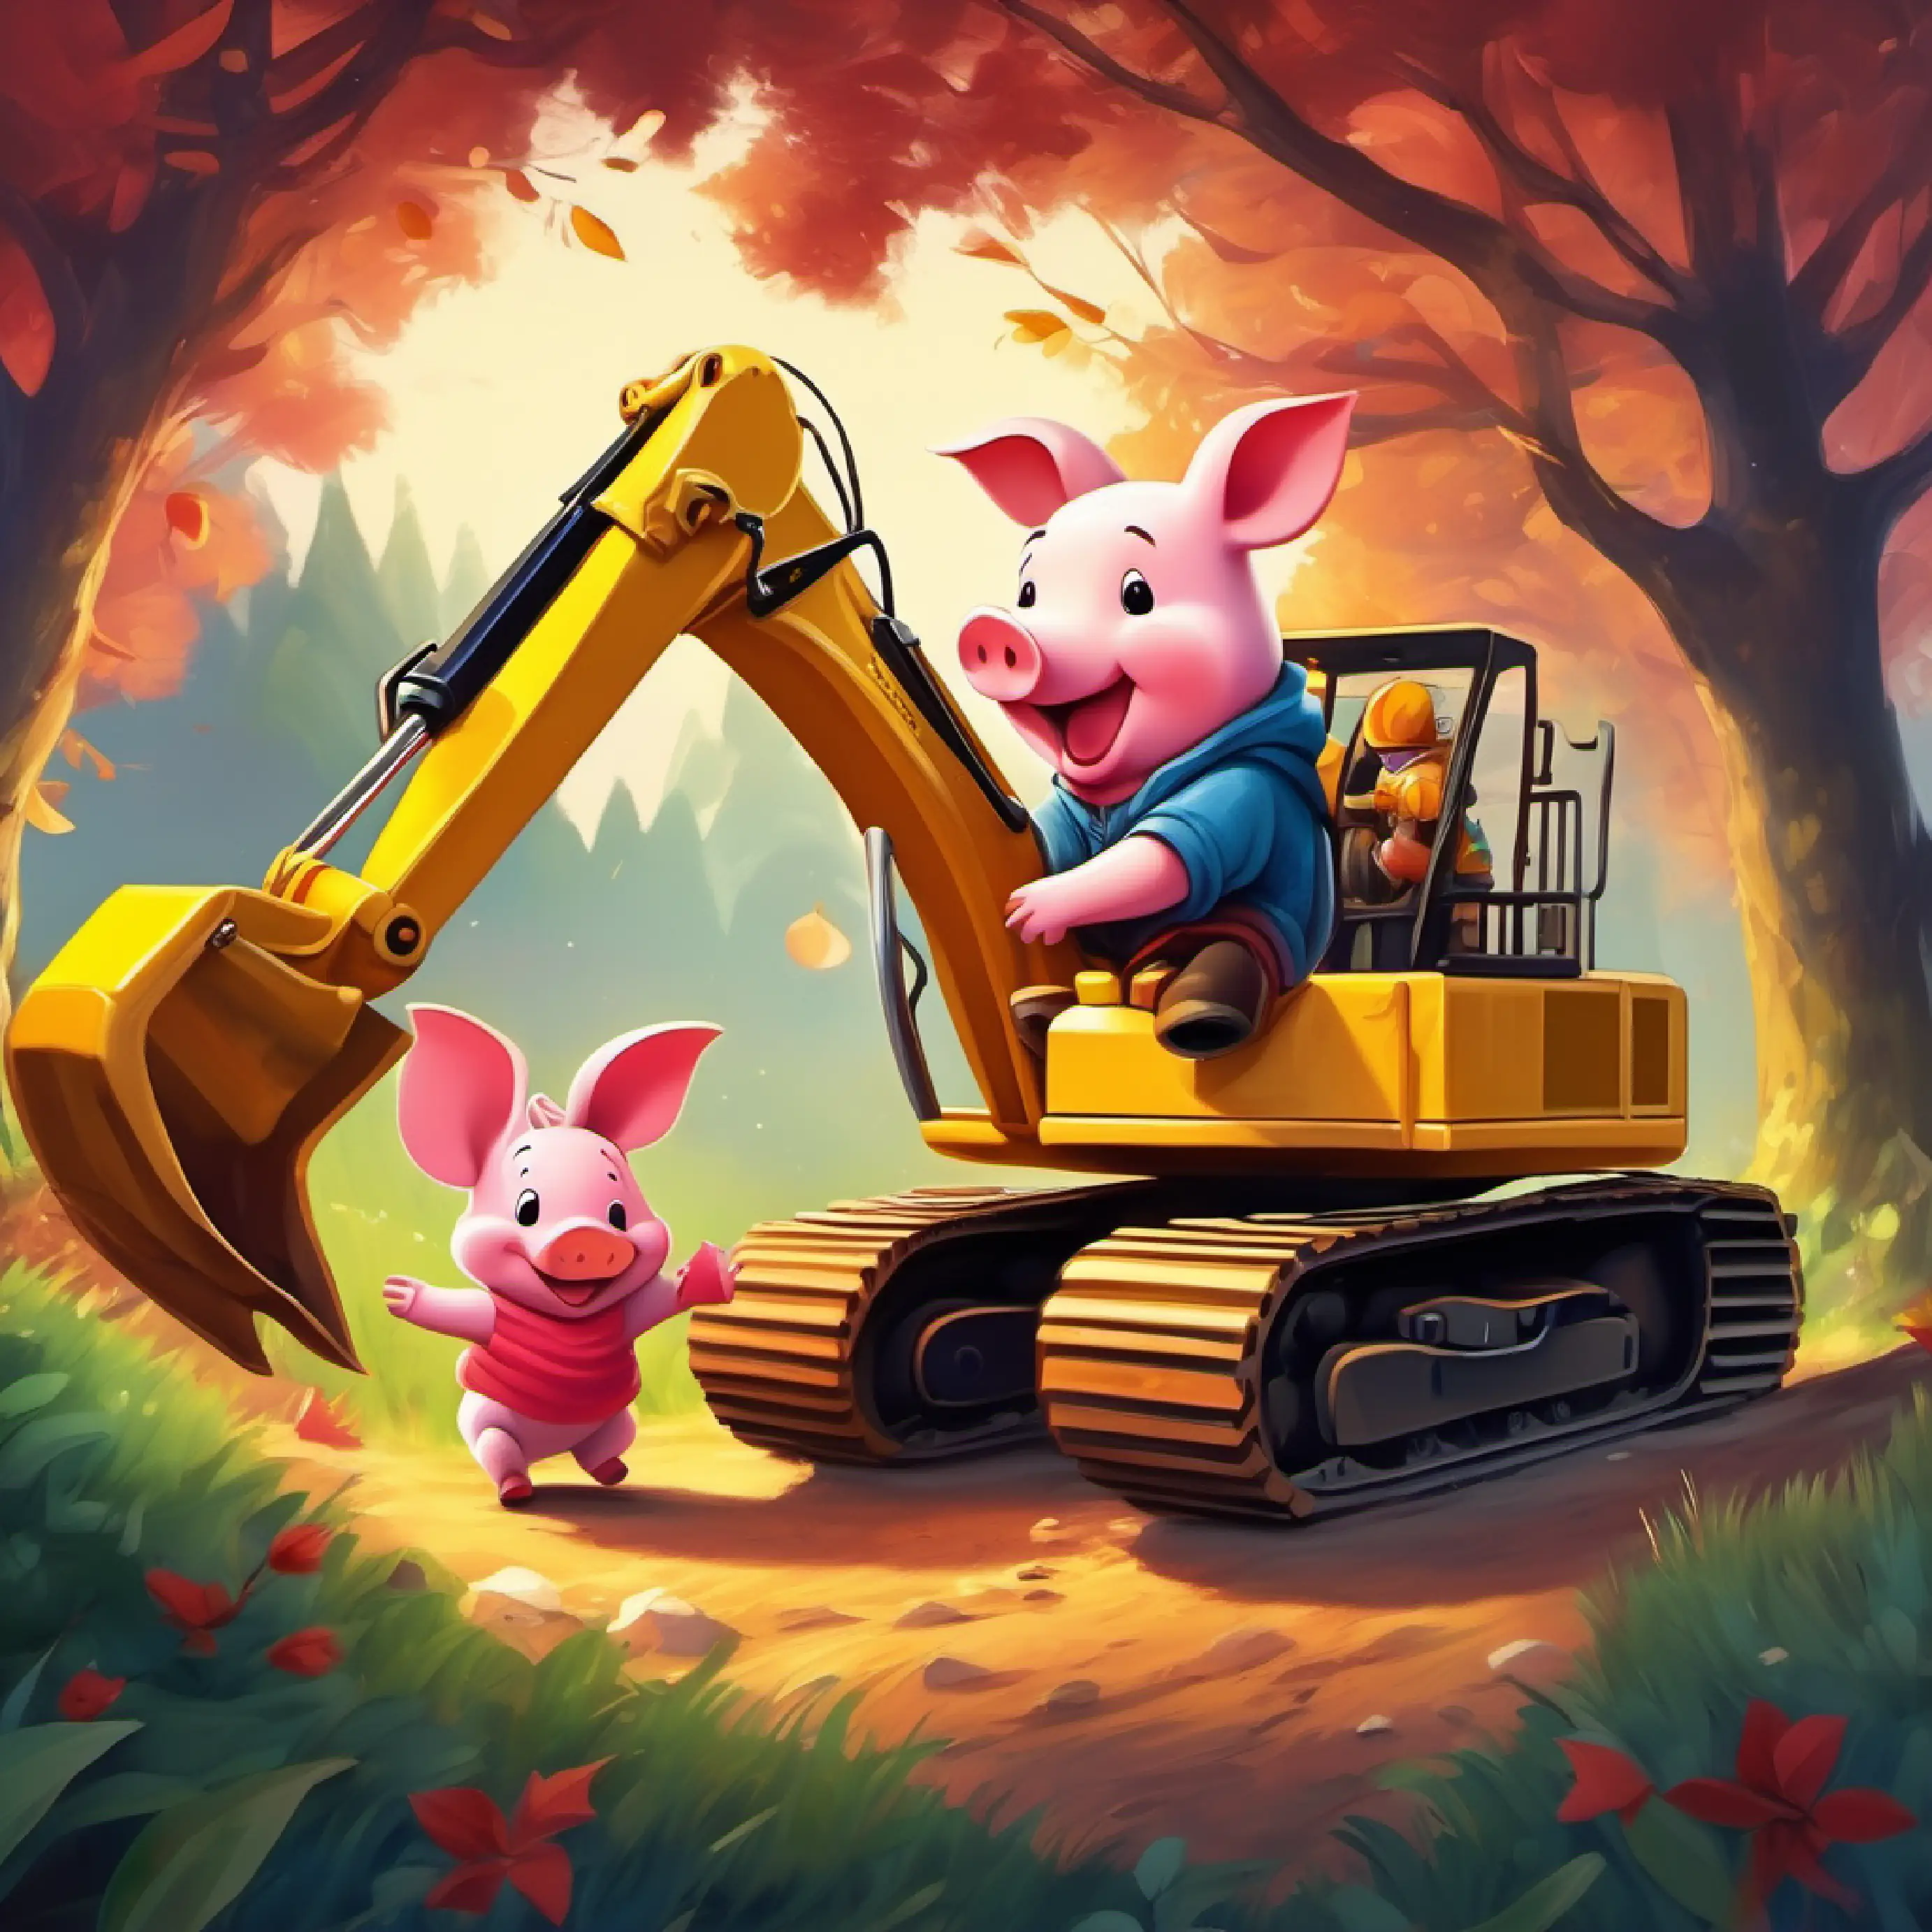 Piglet and Excavator are happy and having fun.